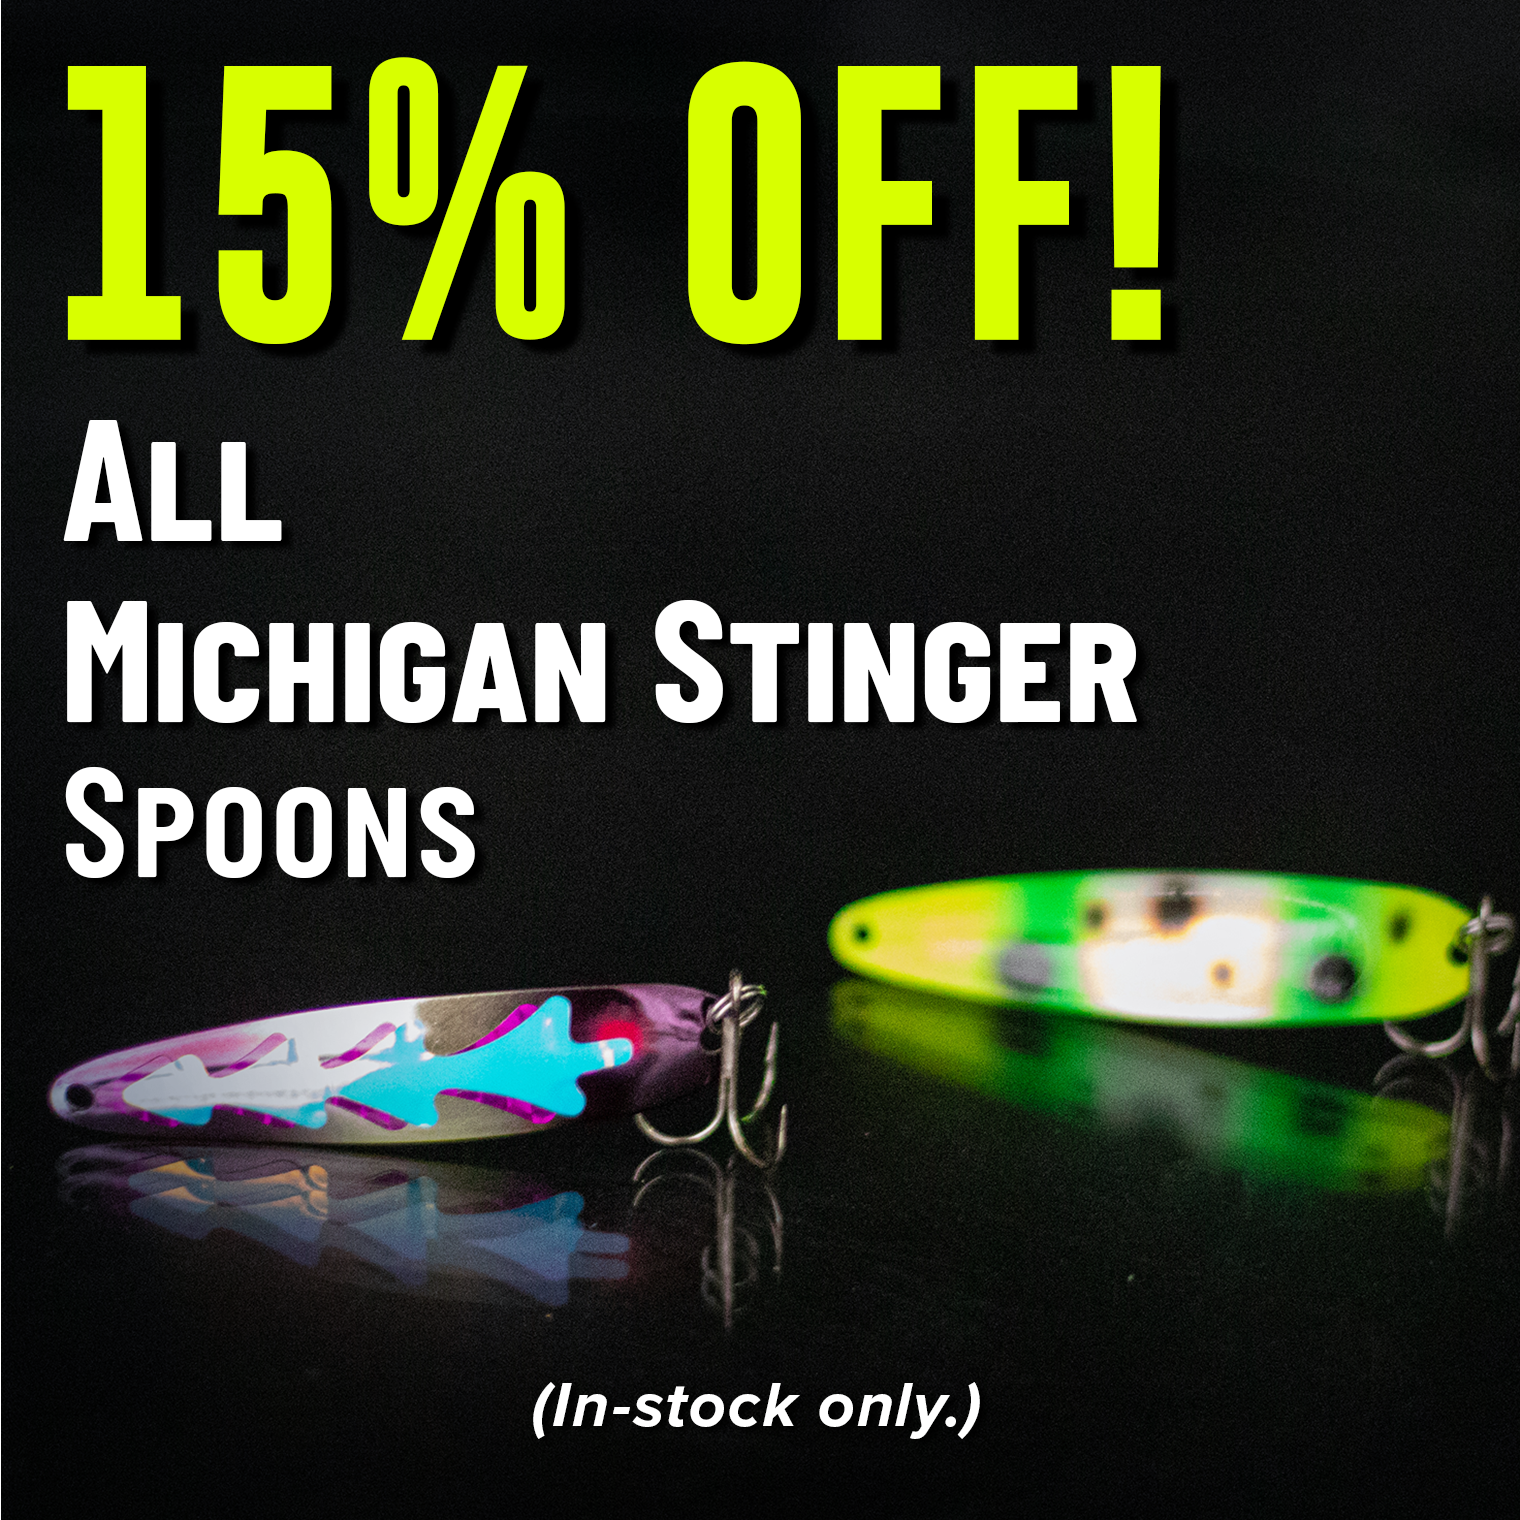 15% Off! All Michigan Stinger Spoons (In-stock only.)